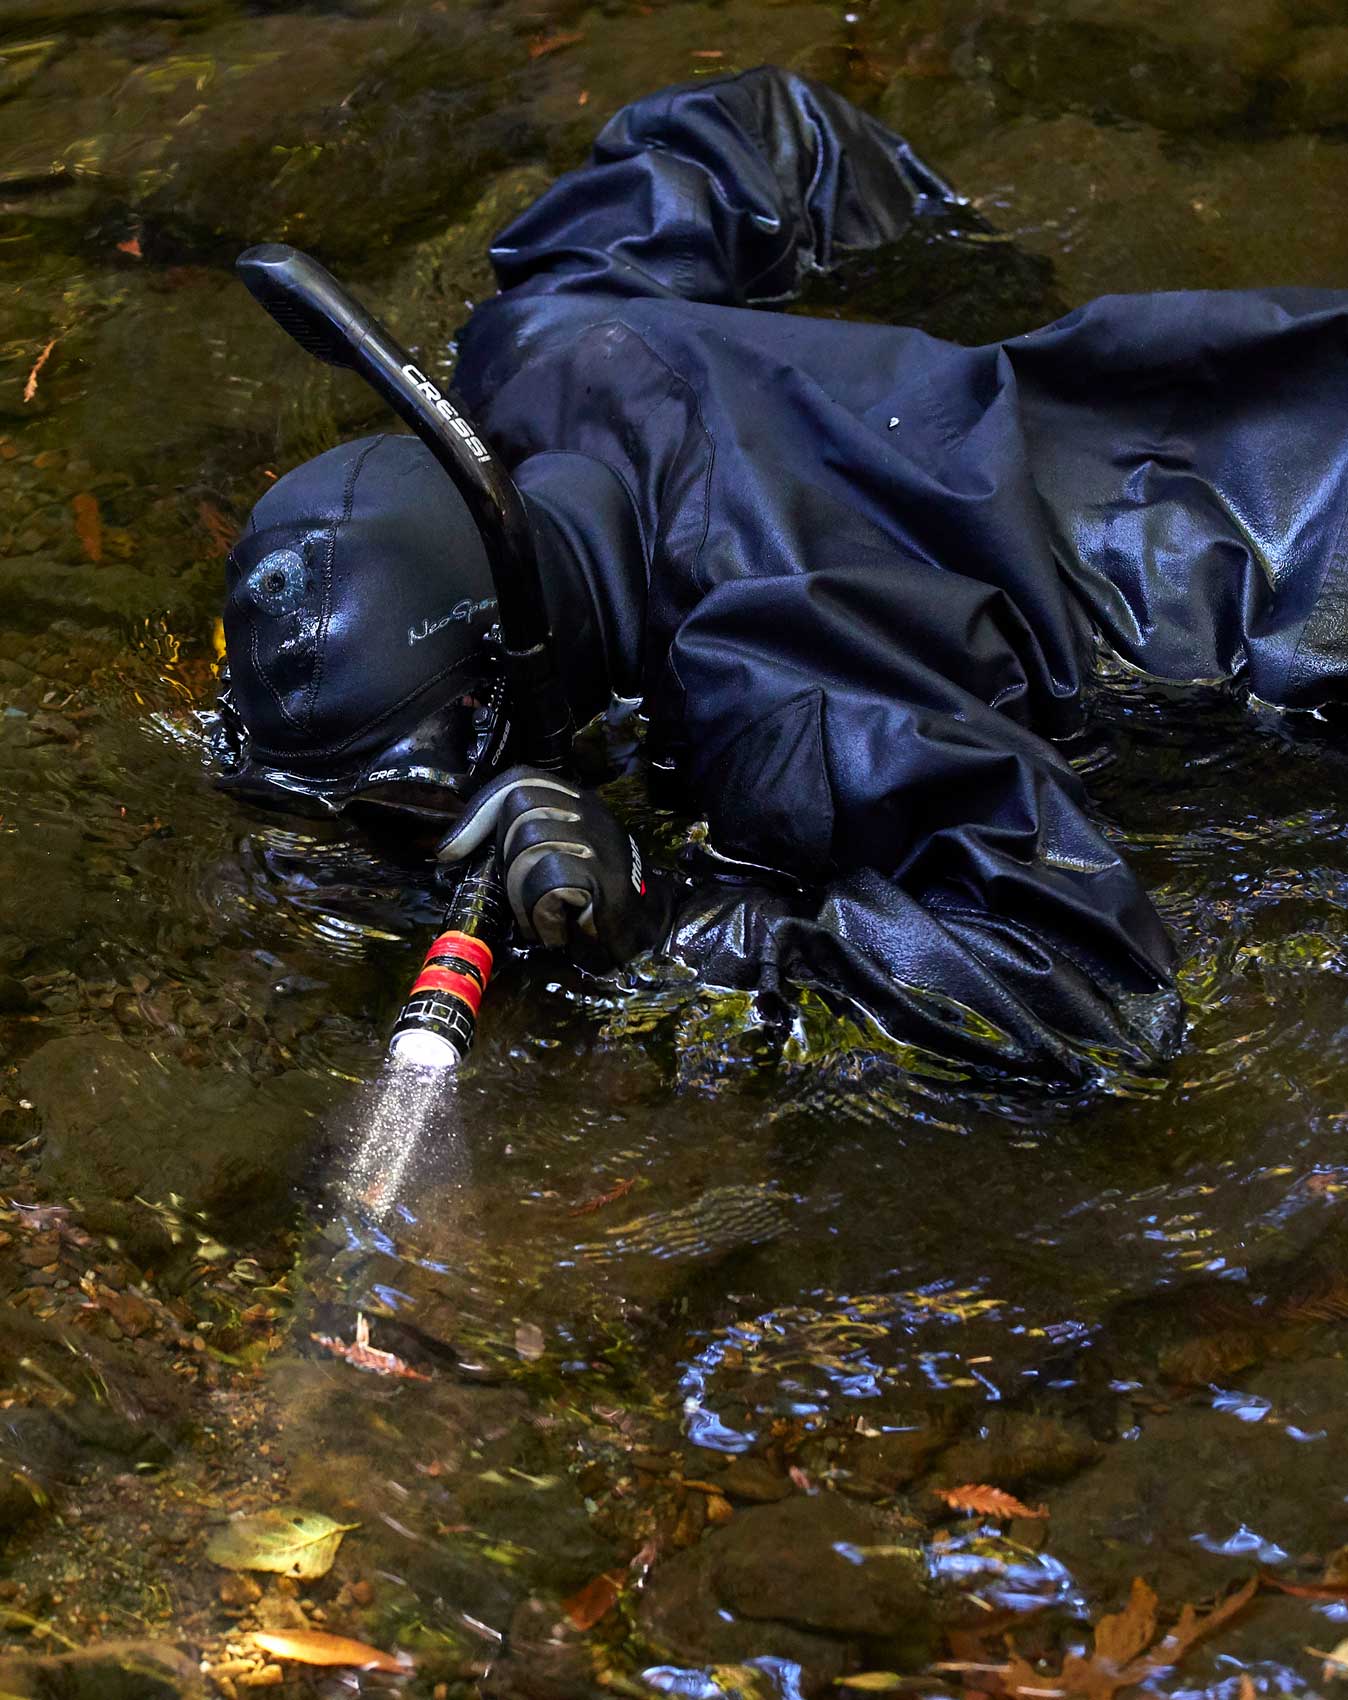 Researcher in Wetsuit uses Flashlight in Stream